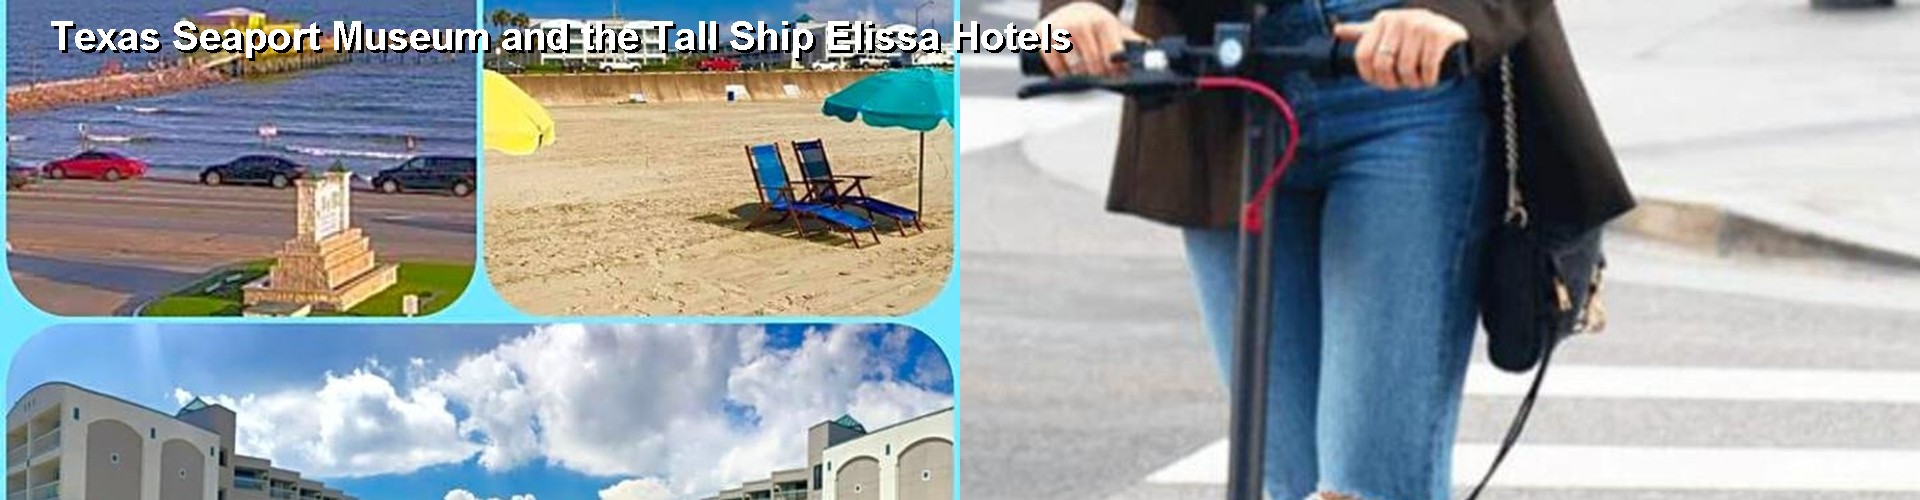 5 Best Hotels near Texas Seaport Museum and the Tall Ship Elissa